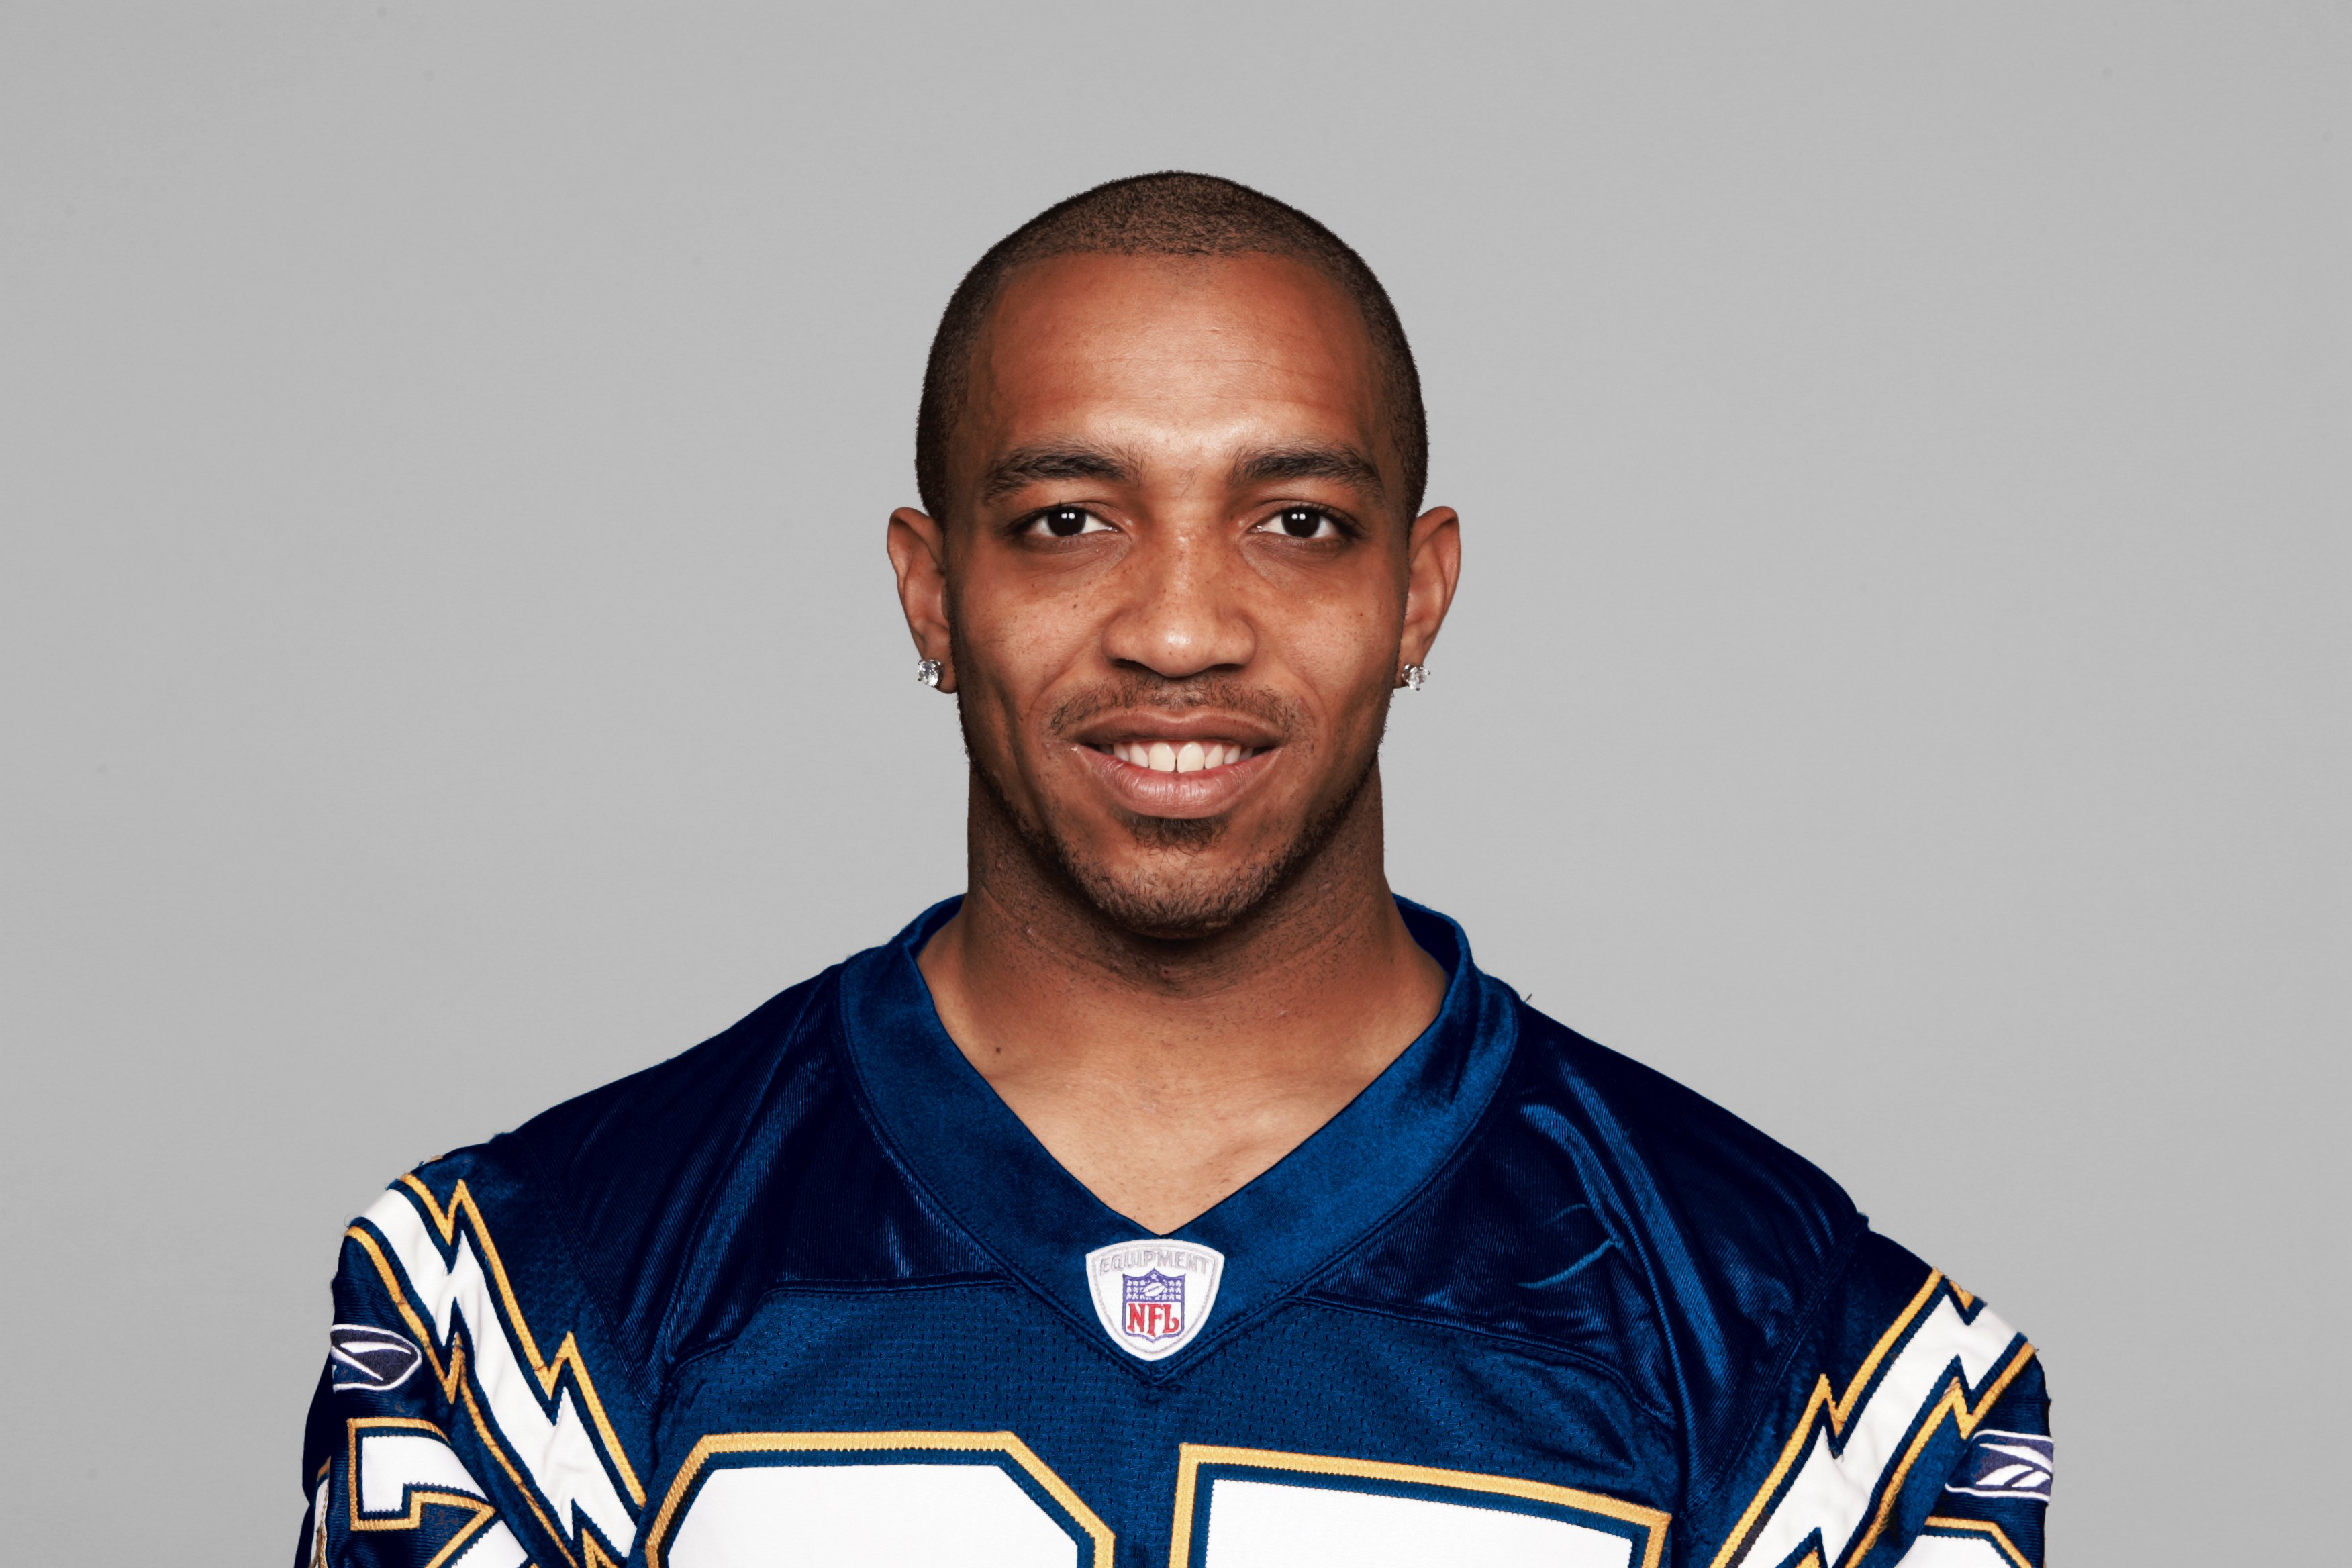 Reche Caldwell of the San Diego Chargers poses for his 2005 NFL headshot at photo day in San Diego, California. | Source: Getty Images.